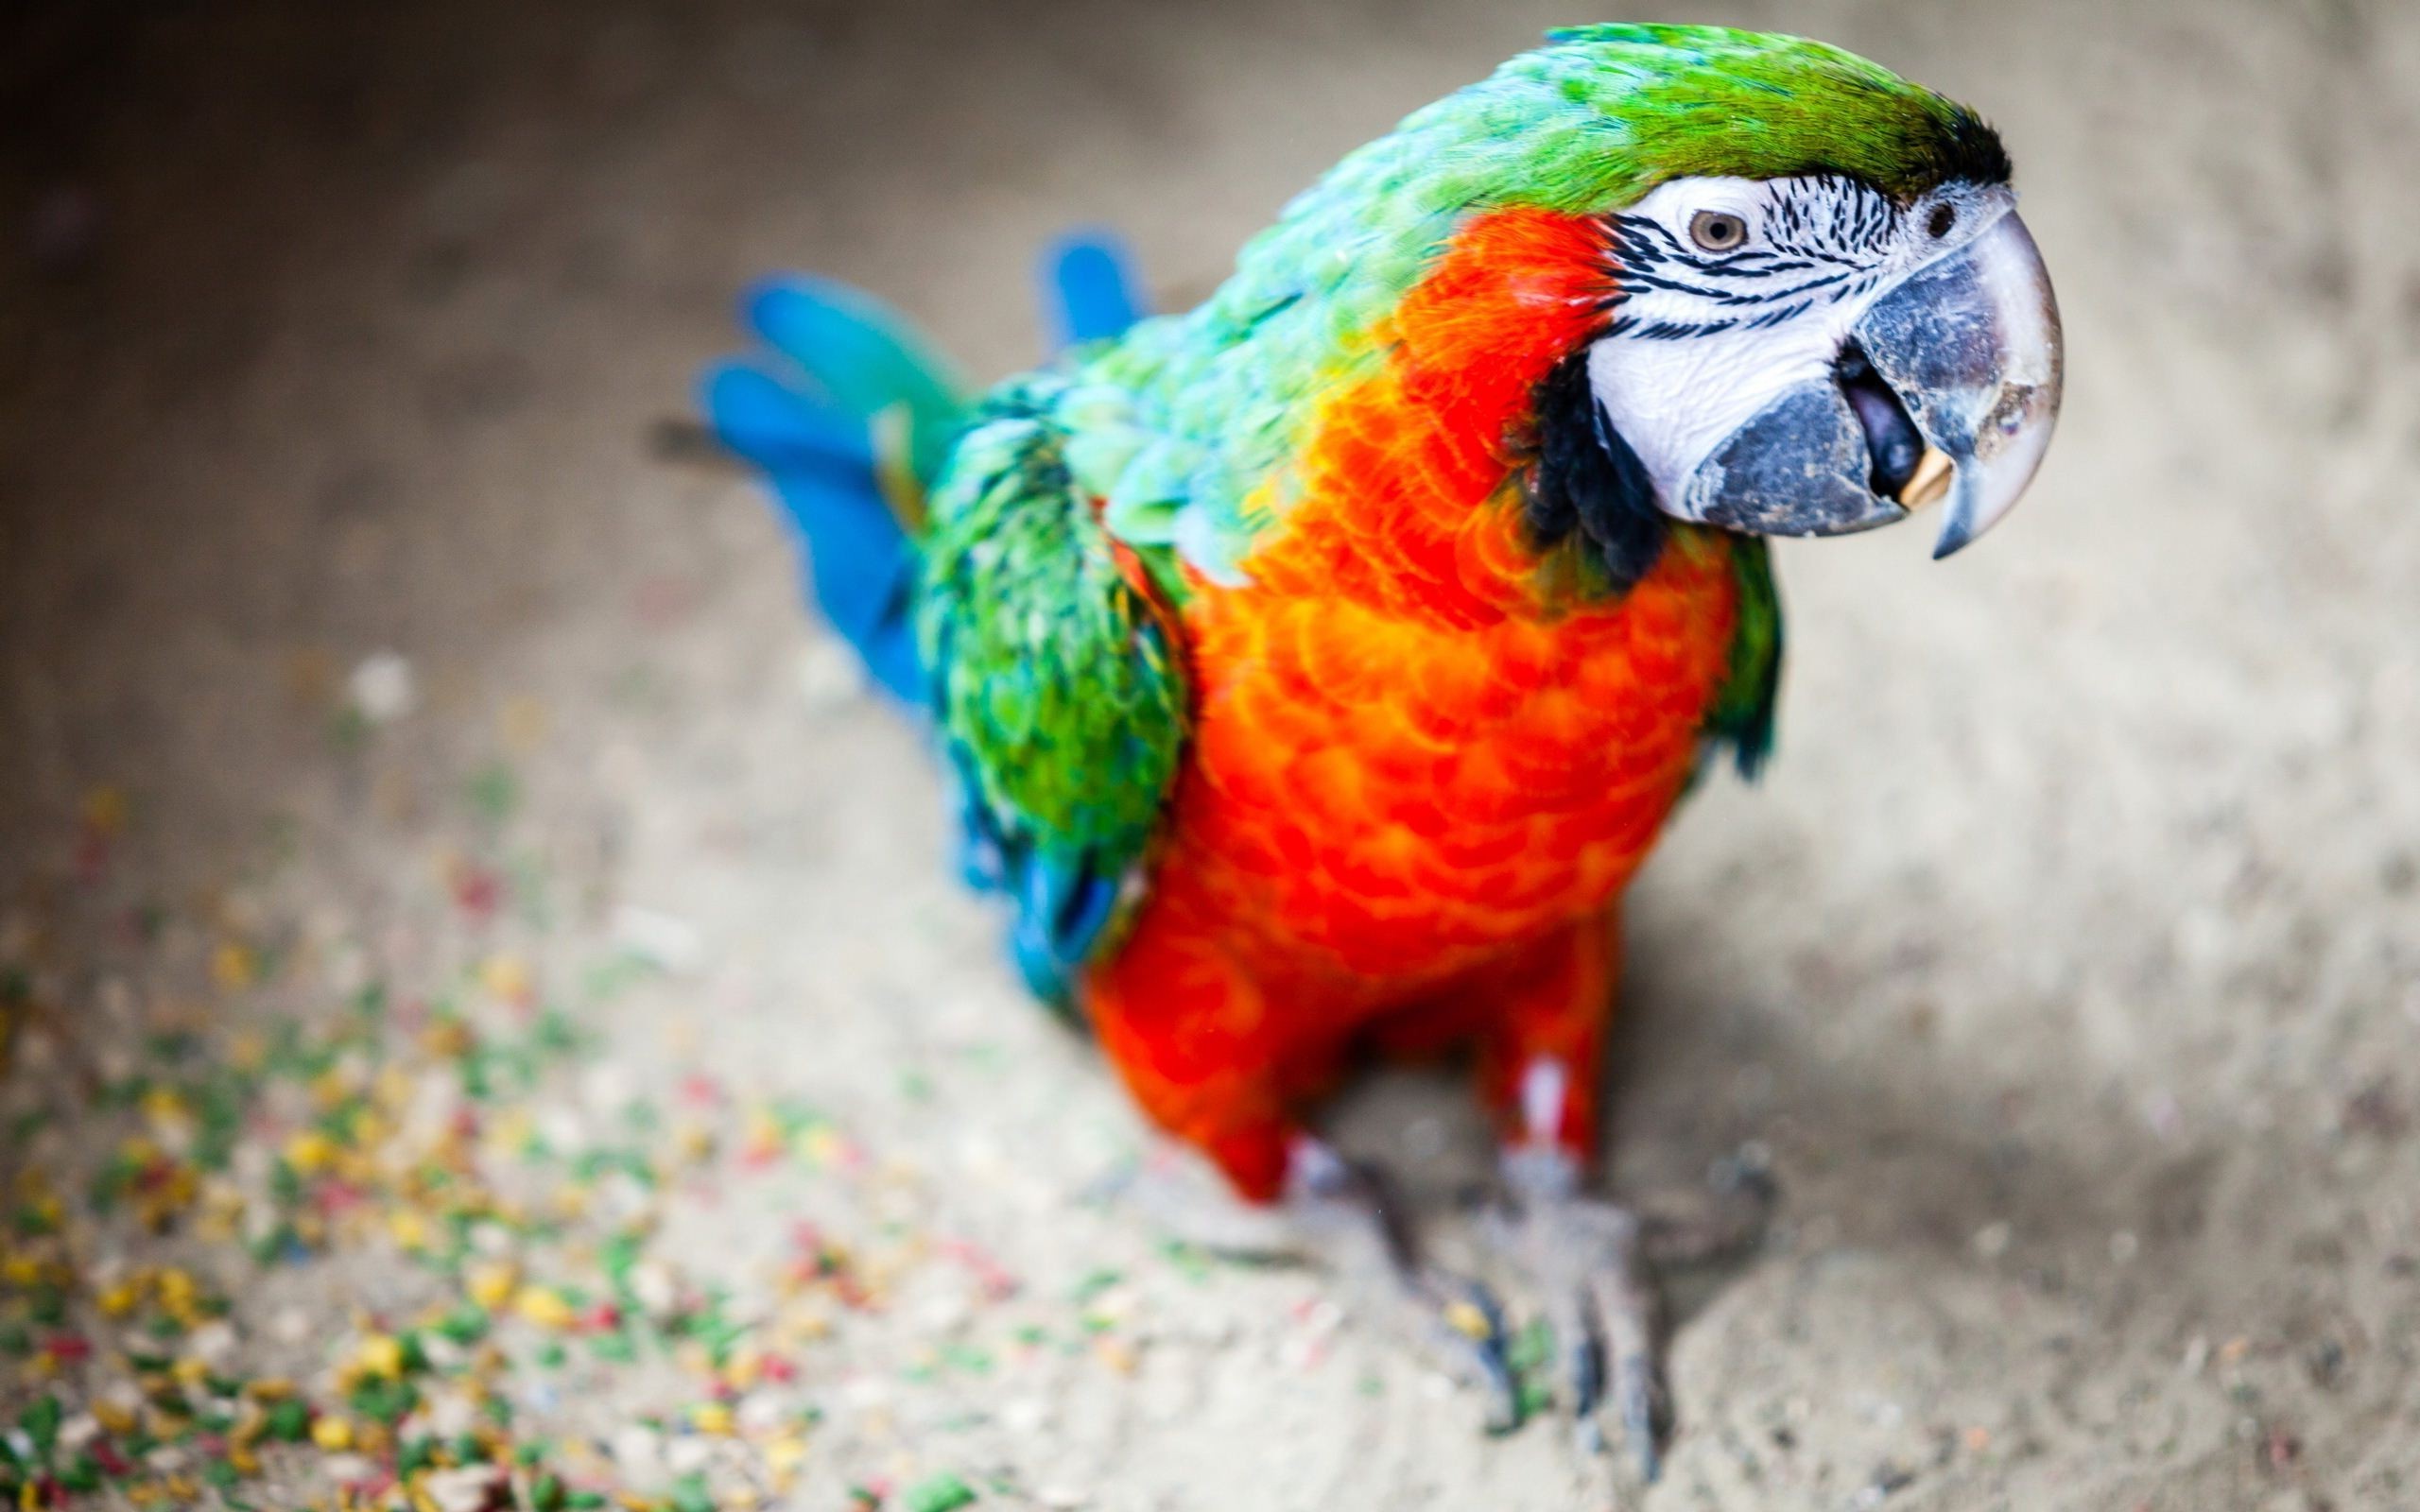 animals, Colorful, Blurred, Depth Of Field, Birds, Parrot, Macaws Wallpaper